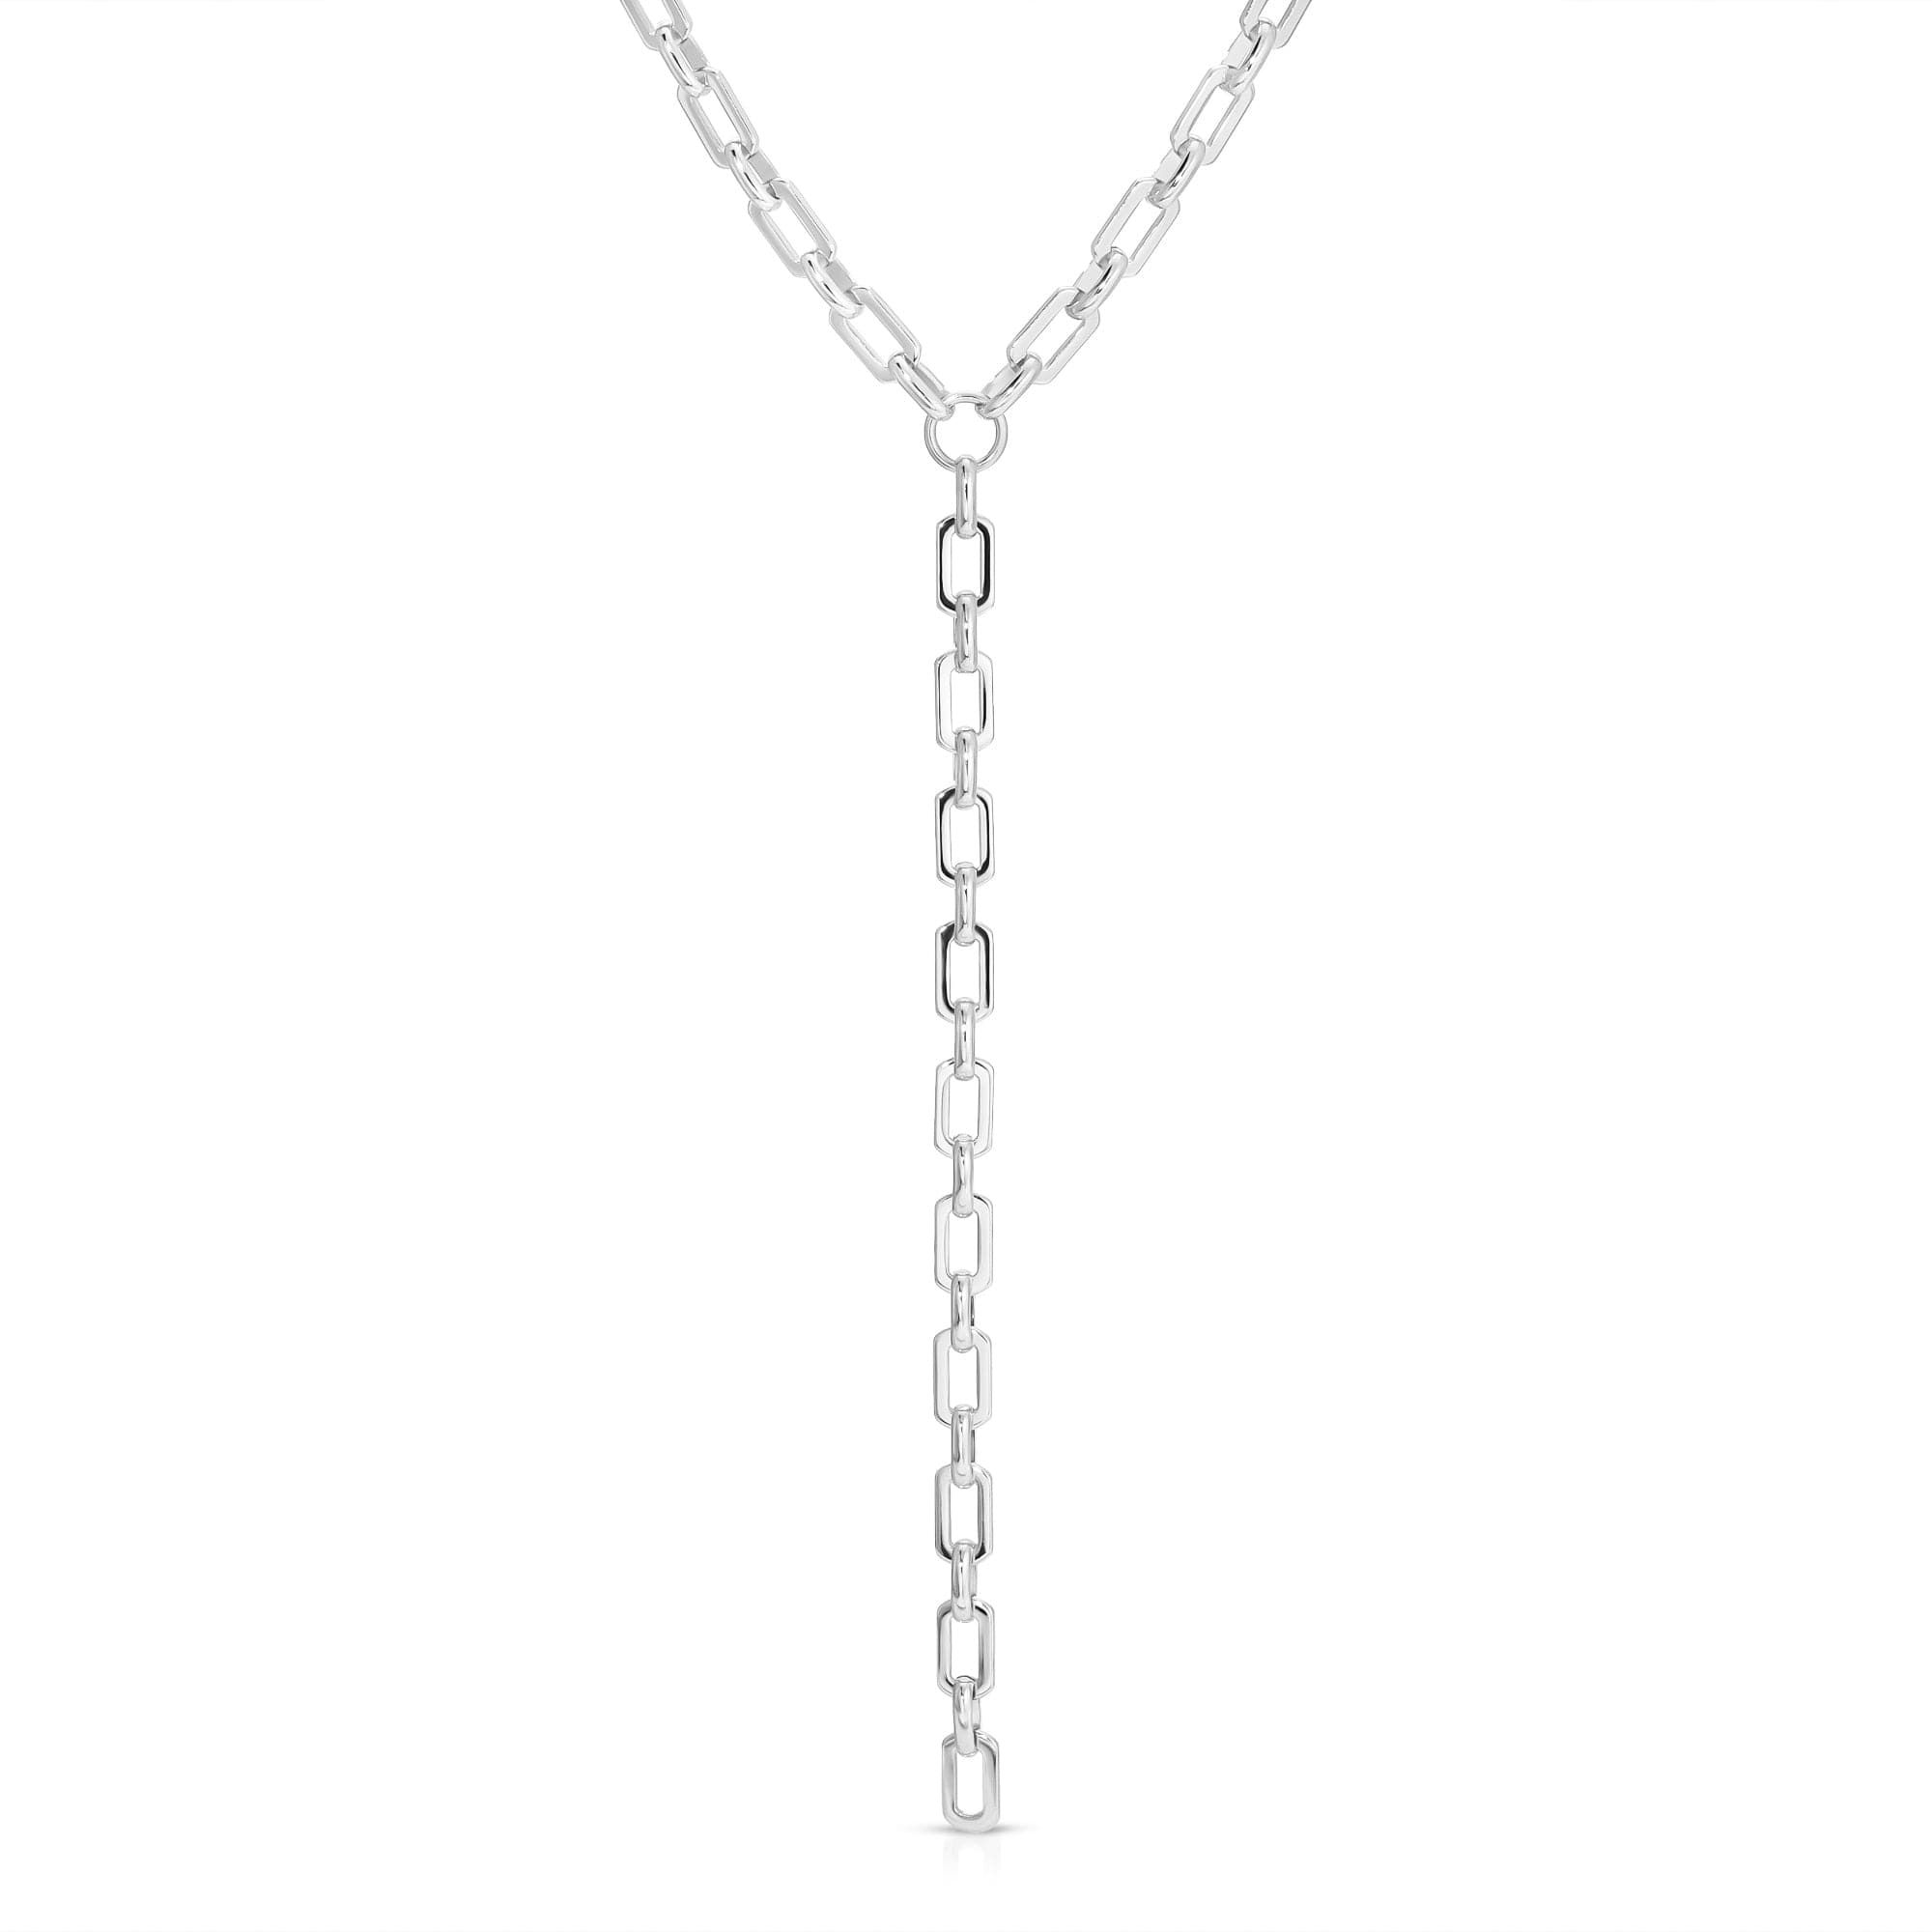 a silver necklace with a chain hanging from it